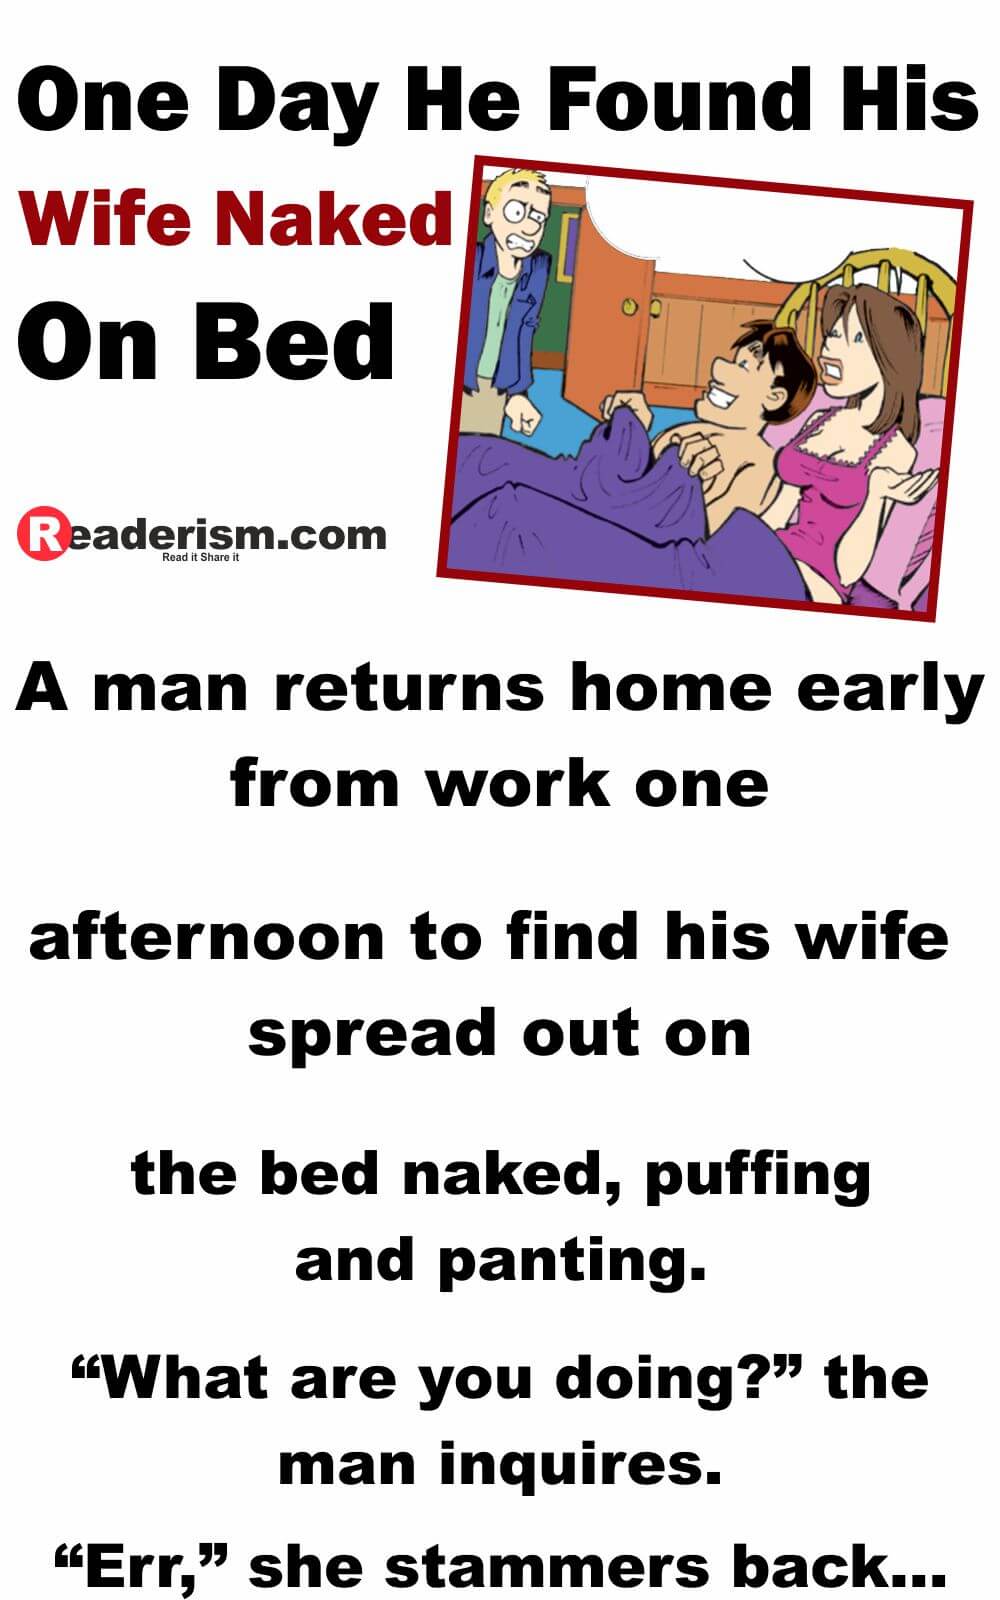 One Day He Found His Wife Naked on Bed